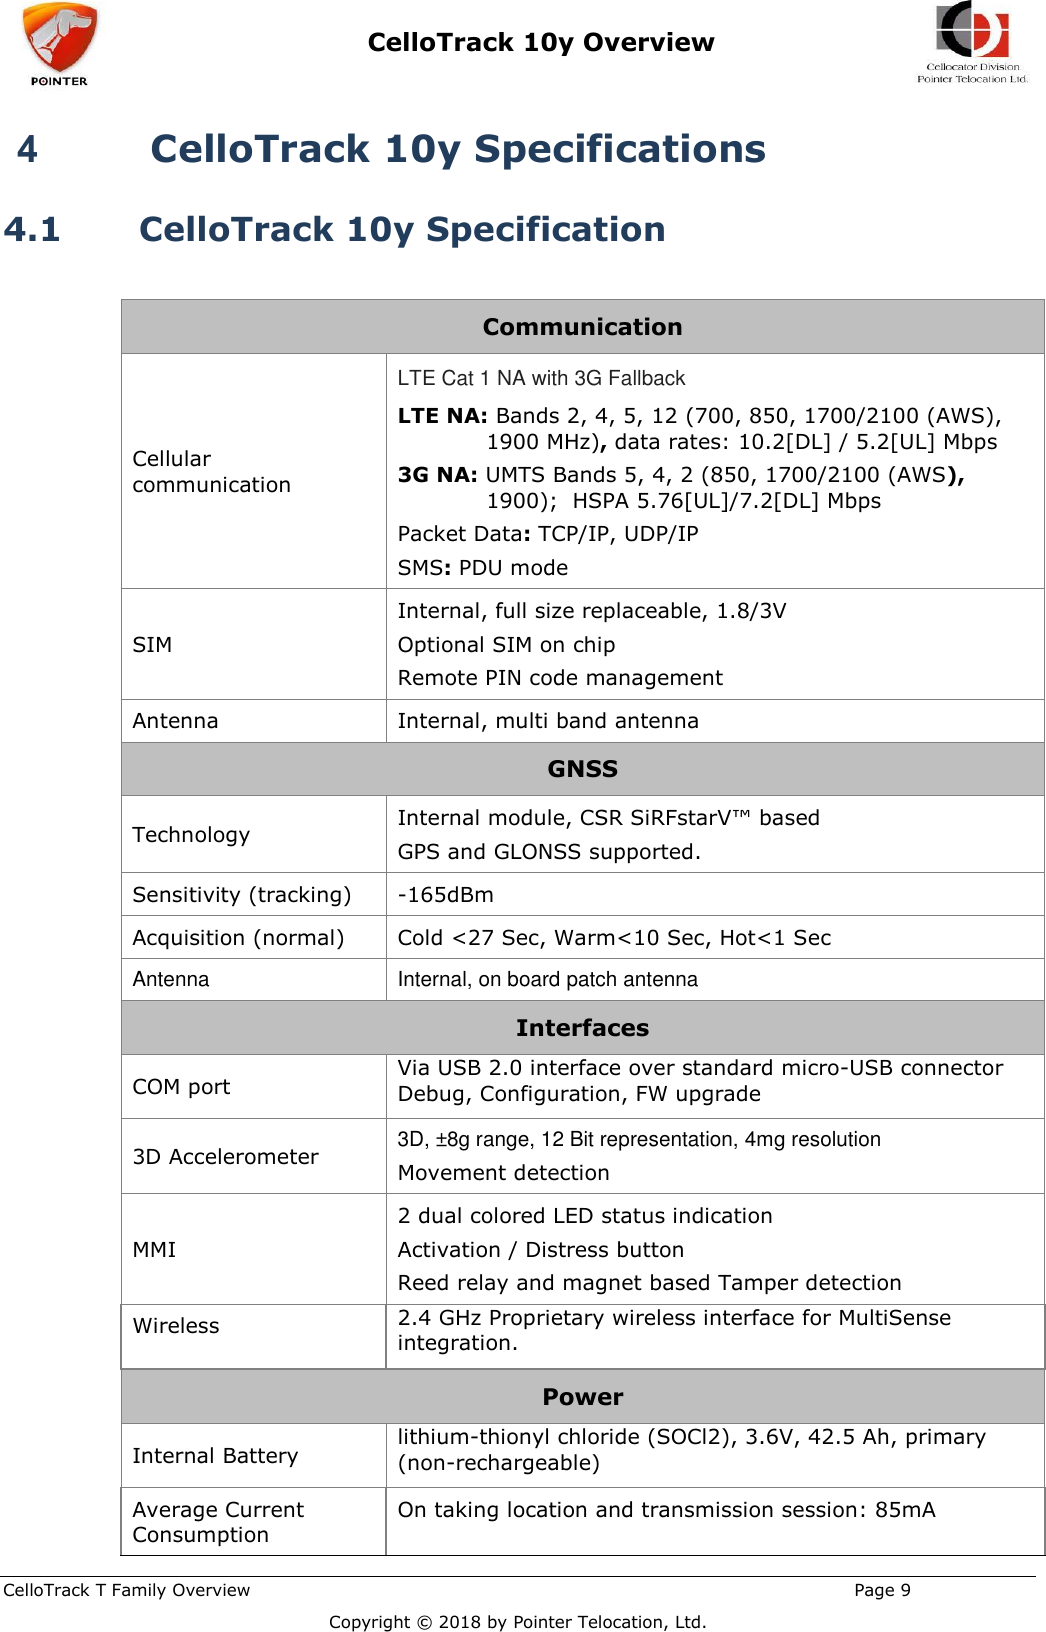  CelloTrack 10y Overview    CelloTrack T Family Overview                                                                                                       Page 9  Copyright © 2018 by Pointer Telocation, Ltd. 4  CelloTrack 10y Specifications 4.1 CelloTrack 10y Specification  Communication Cellular communication LTE Cat 1 NA with 3G Fallback LTE NA: Bands 2, 4, 5, 12 (700, 850, 1700/2100 (AWS), 1900 MHz), data rates: 10.2[DL] / 5.2[UL] Mbps 3G NA: UMTS Bands 5, 4, 2 (850, 1700/2100 (AWS), 1900);  HSPA 5.76[UL]/7.2[DL] Mbps Packet Data: TCP/IP, UDP/IP SMS: PDU mode SIM Internal, full size replaceable, 1.8/3V Optional SIM on chip Remote PIN code management Antenna Internal, multi band antenna GNSS  Technology Internal module, CSR SiRFstarV™ based GPS and GLONSS supported. Sensitivity (tracking) -165dBm Acquisition (normal) Cold &lt;27 Sec, Warm&lt;10 Sec, Hot&lt;1 Sec Antenna Internal, on board patch antenna Interfaces COM port Via USB 2.0 interface over standard micro-USB connector Debug, Configuration, FW upgrade  3D Accelerometer 3D, ±8g range, 12 Bit representation, 4mg resolution Movement detection MMI 2 dual colored LED status indication Activation / Distress button Reed relay and magnet based Tamper detection Wireless 2.4 GHz Proprietary wireless interface for MultiSense integration. Power Internal Battery lithium-thionyl chloride (SOCl2), 3.6V, 42.5 Ah, primary (non-rechargeable)  Average Current Consumption On taking location and transmission session: 85mA 